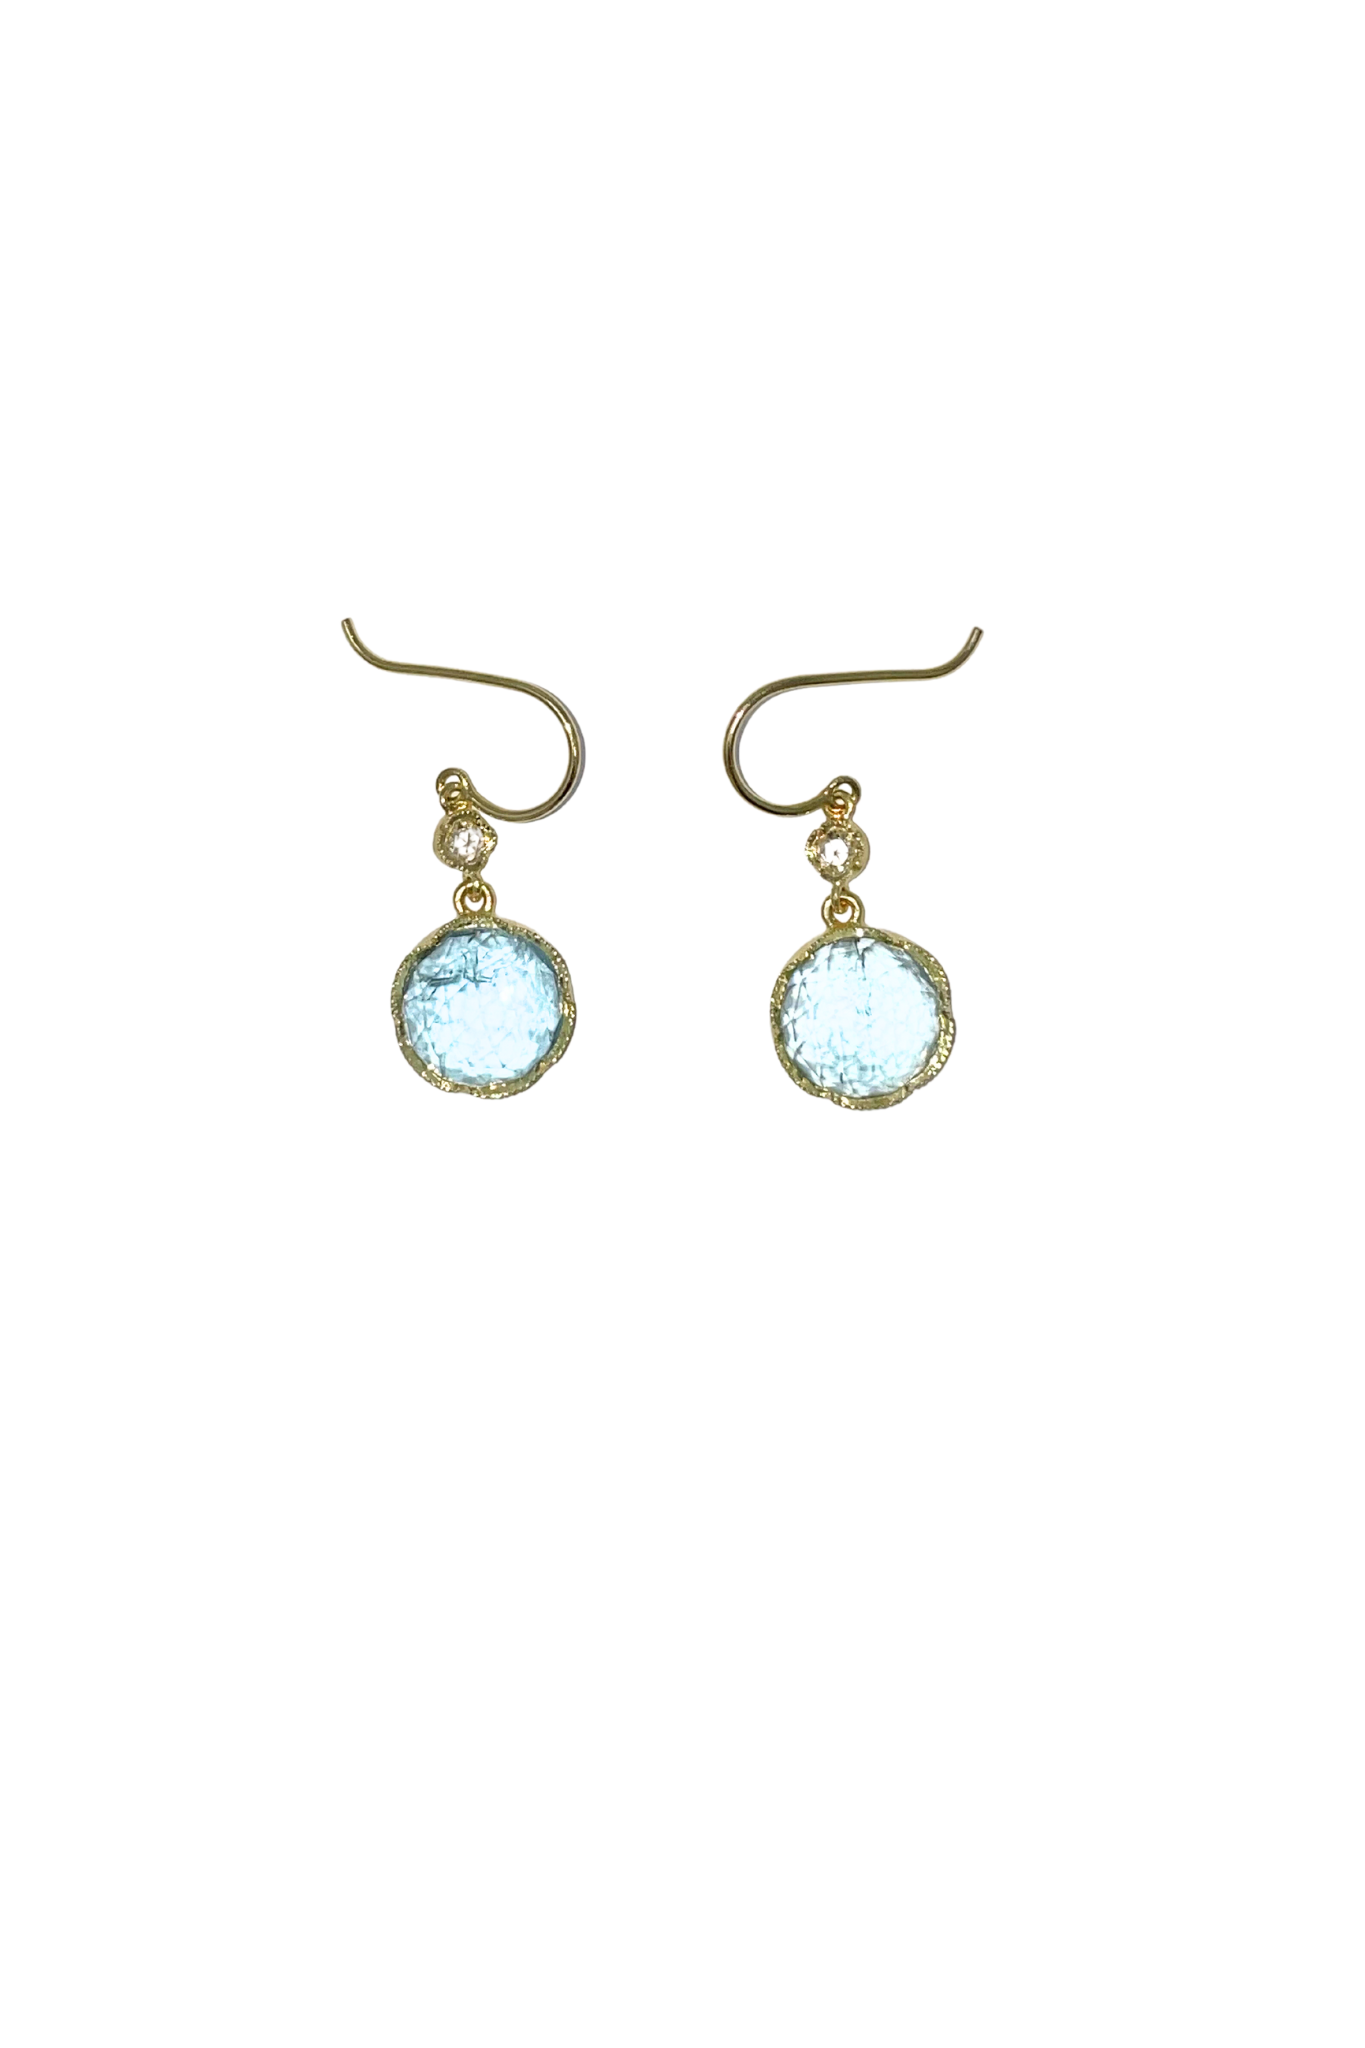 Irene Neuwirth 18k Yellow Gold Earring with 11mm Rose Cut Fine Aquamarine and 3mm Rose Cut Diamonds (0.16 cts)